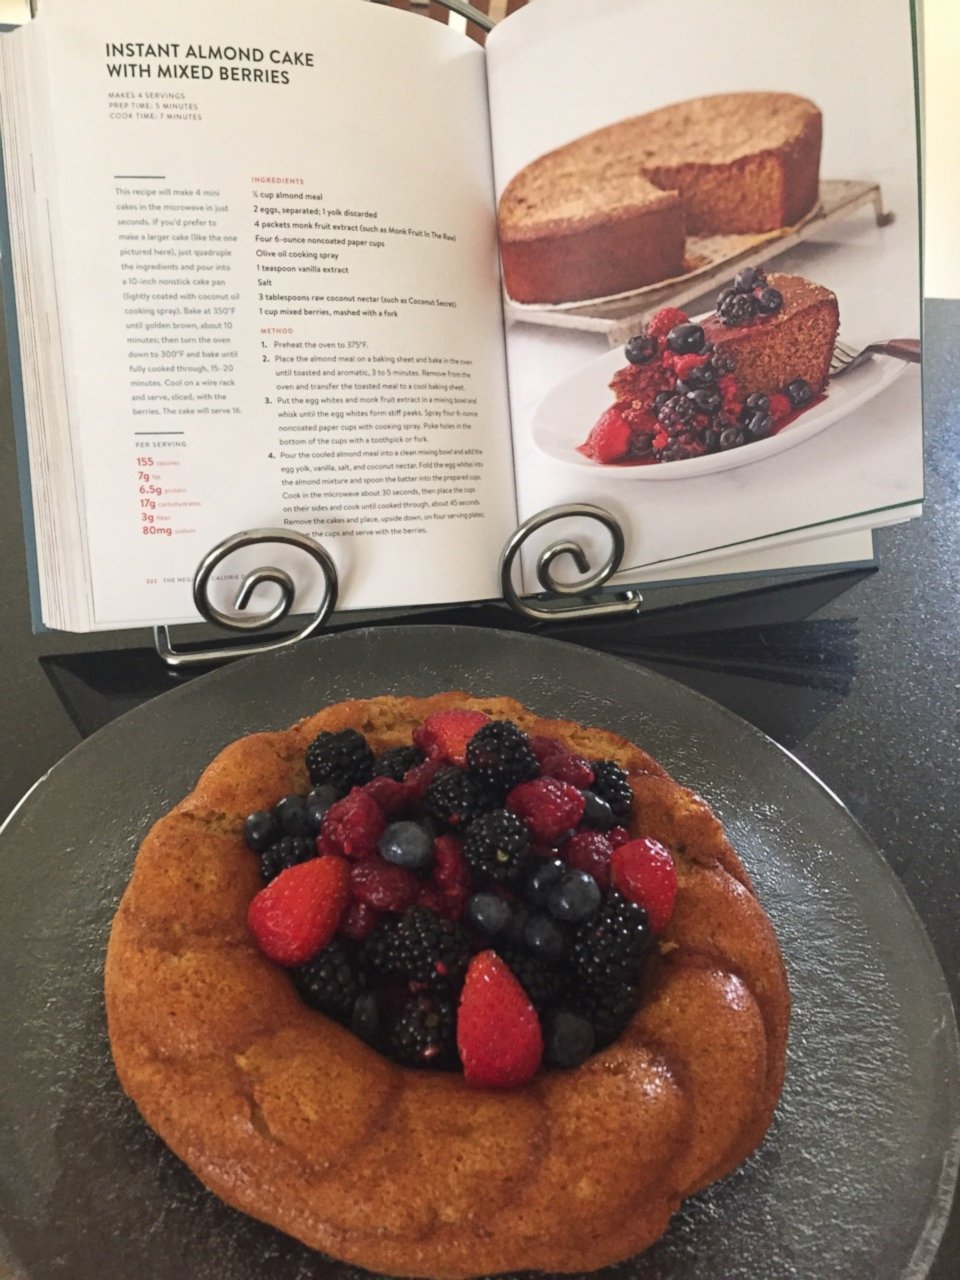 PHOTO: Chef Rocco DiSpirito's instant almond cake with mixed berries, from the book "The Negative Calorie Diet."